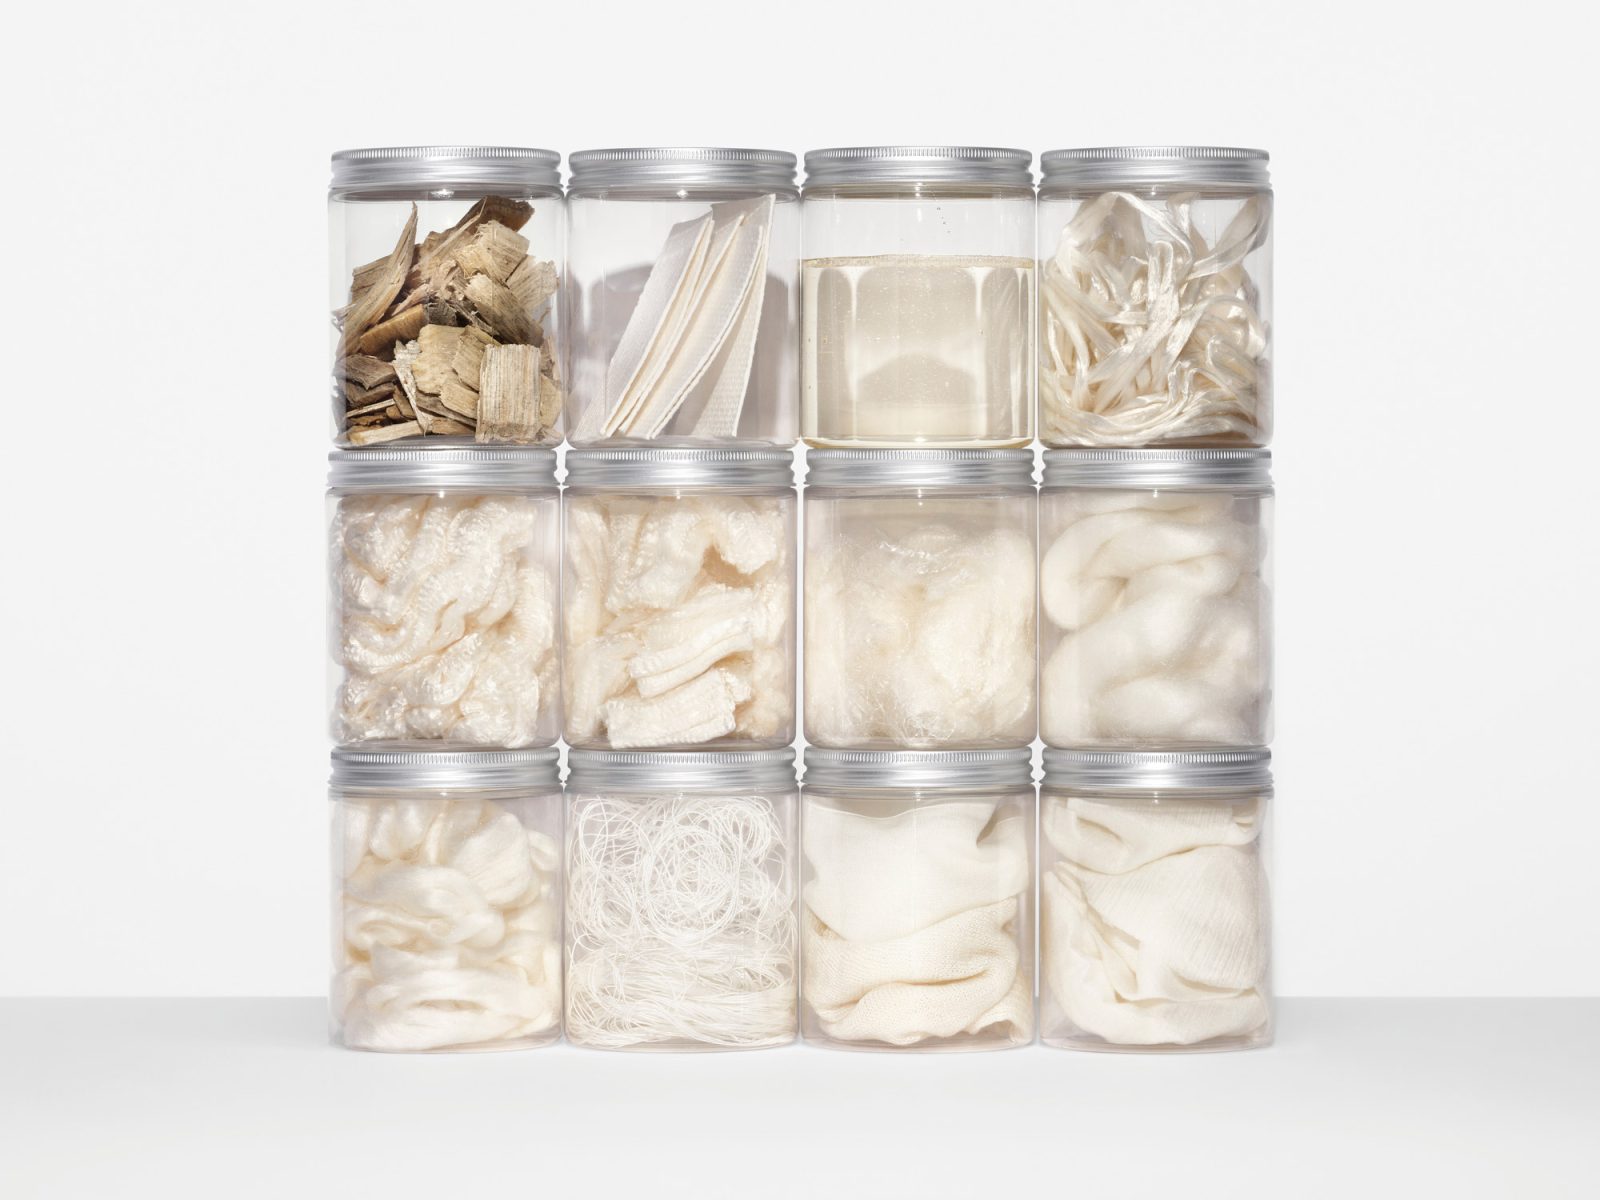 Glass jars containing light textile samples, stacked on each other.